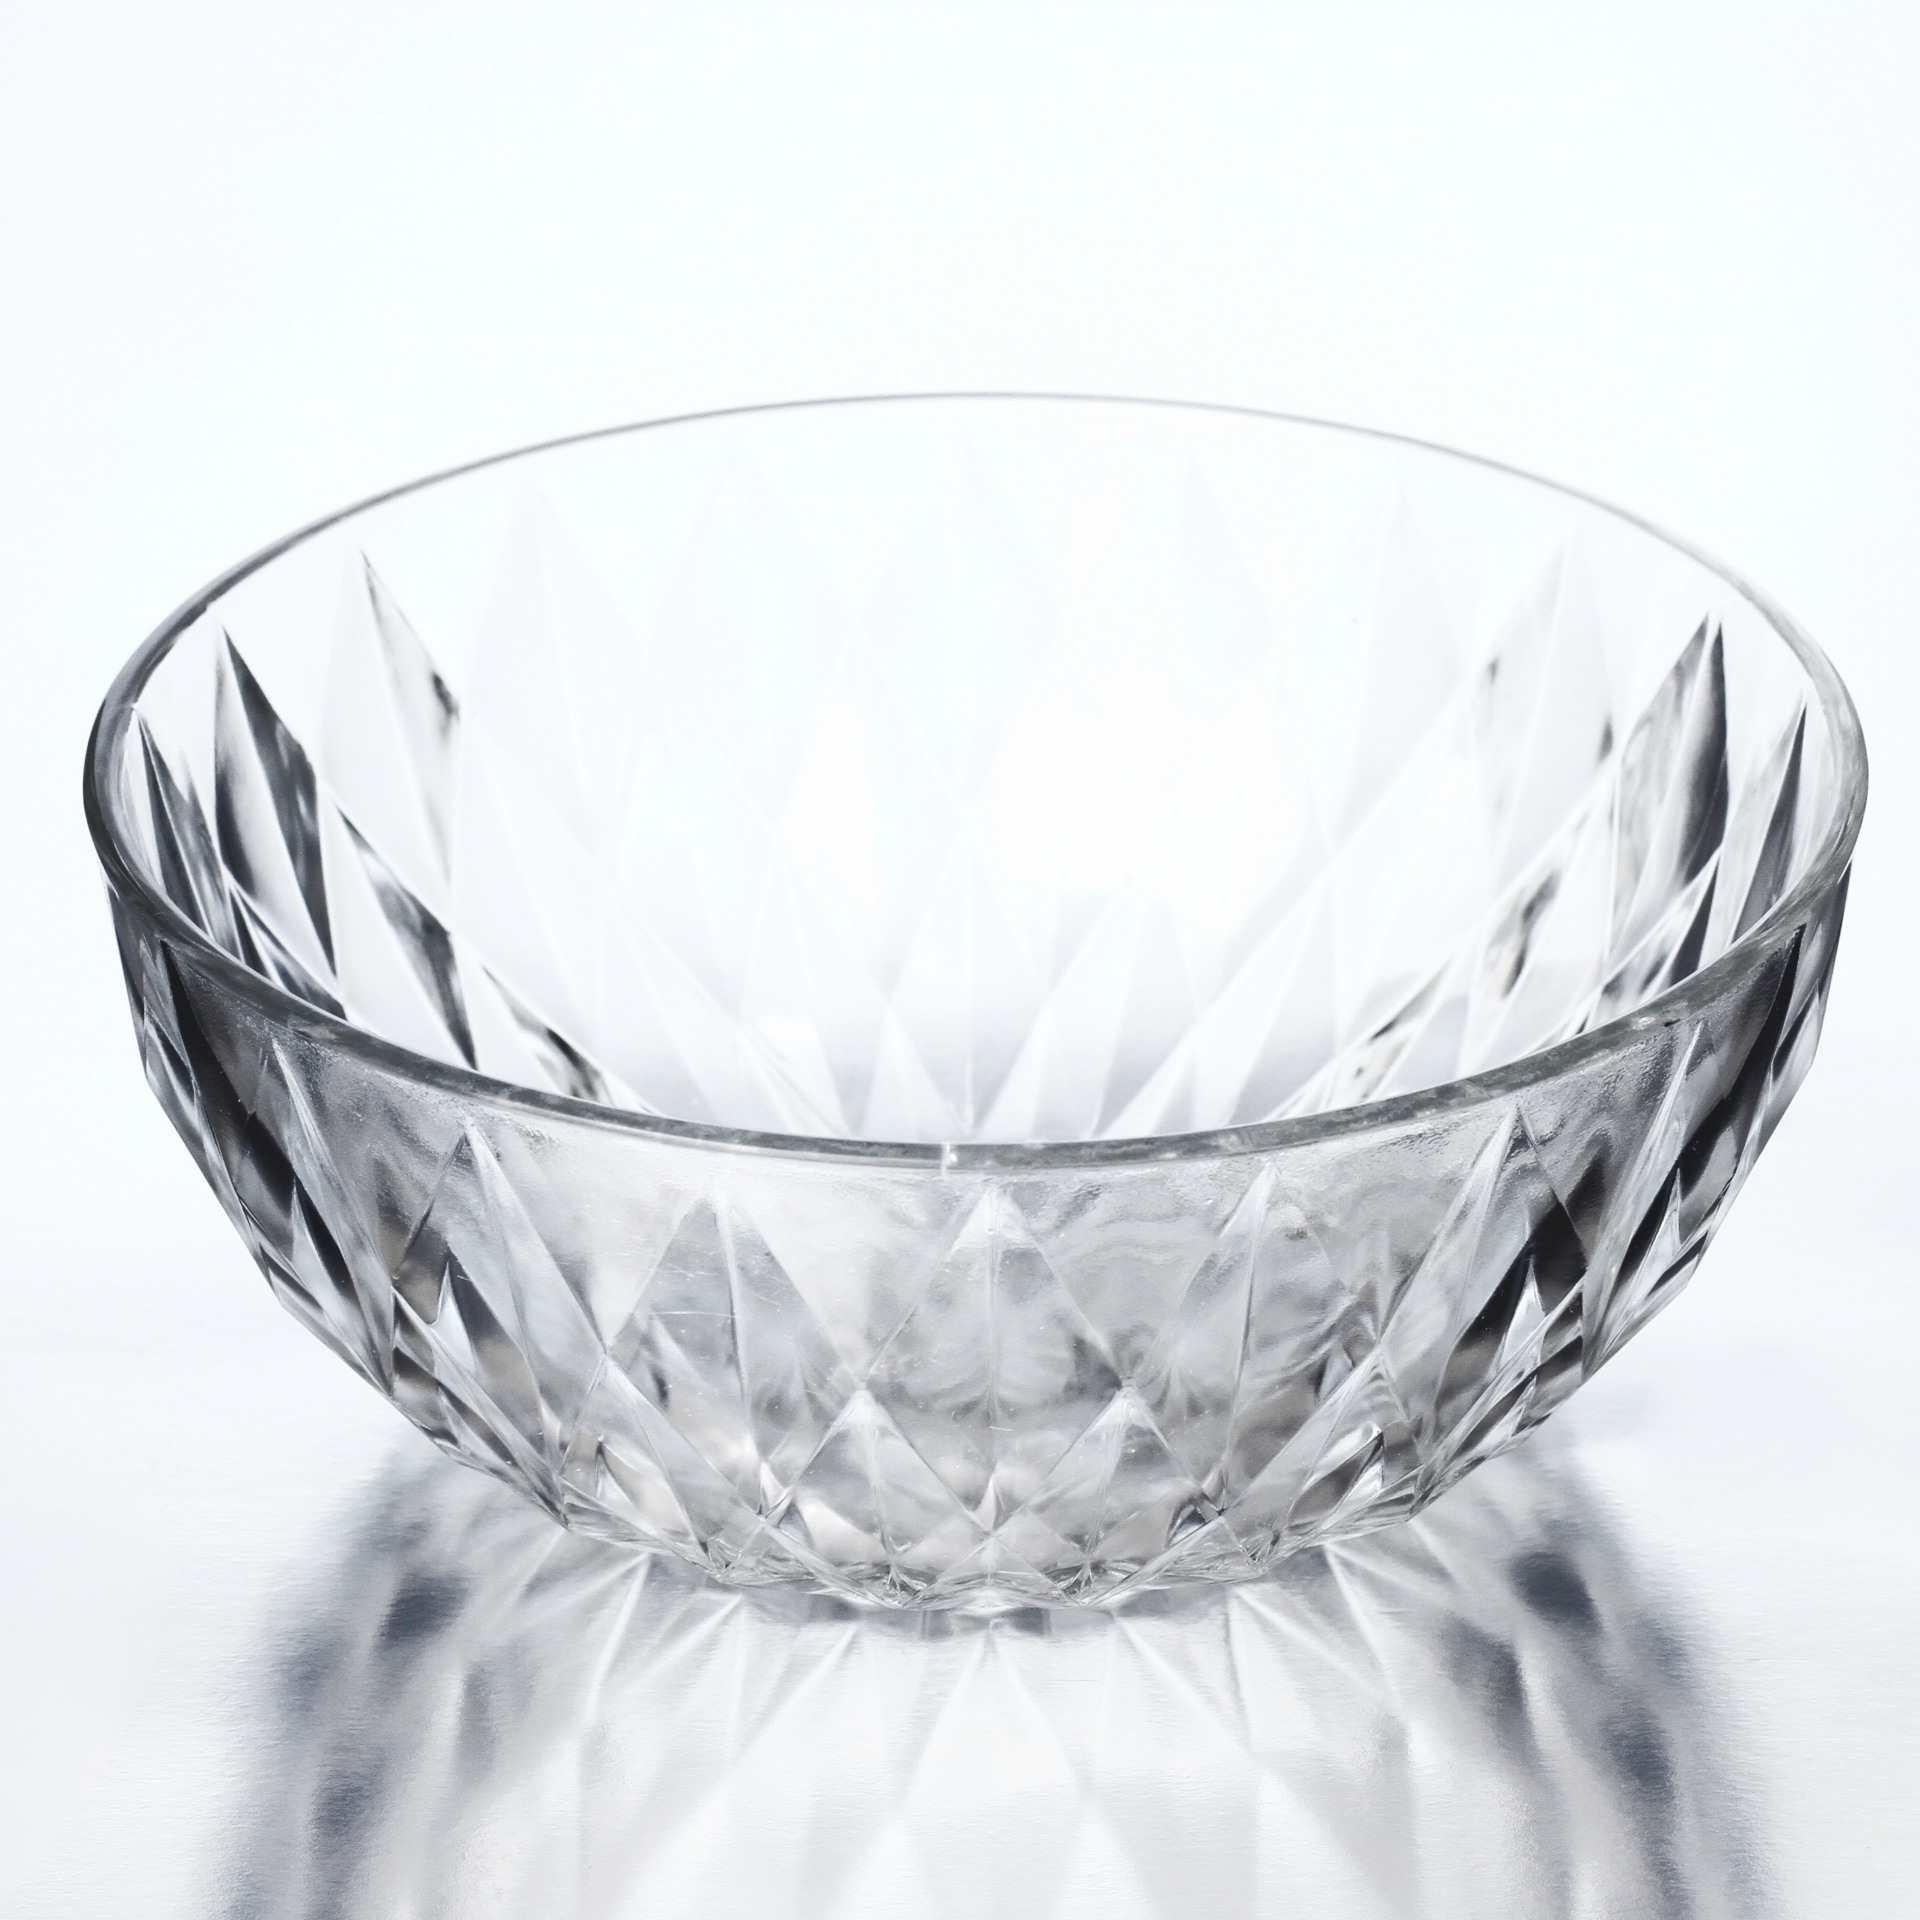 Why do many people choose to use glass bowls?